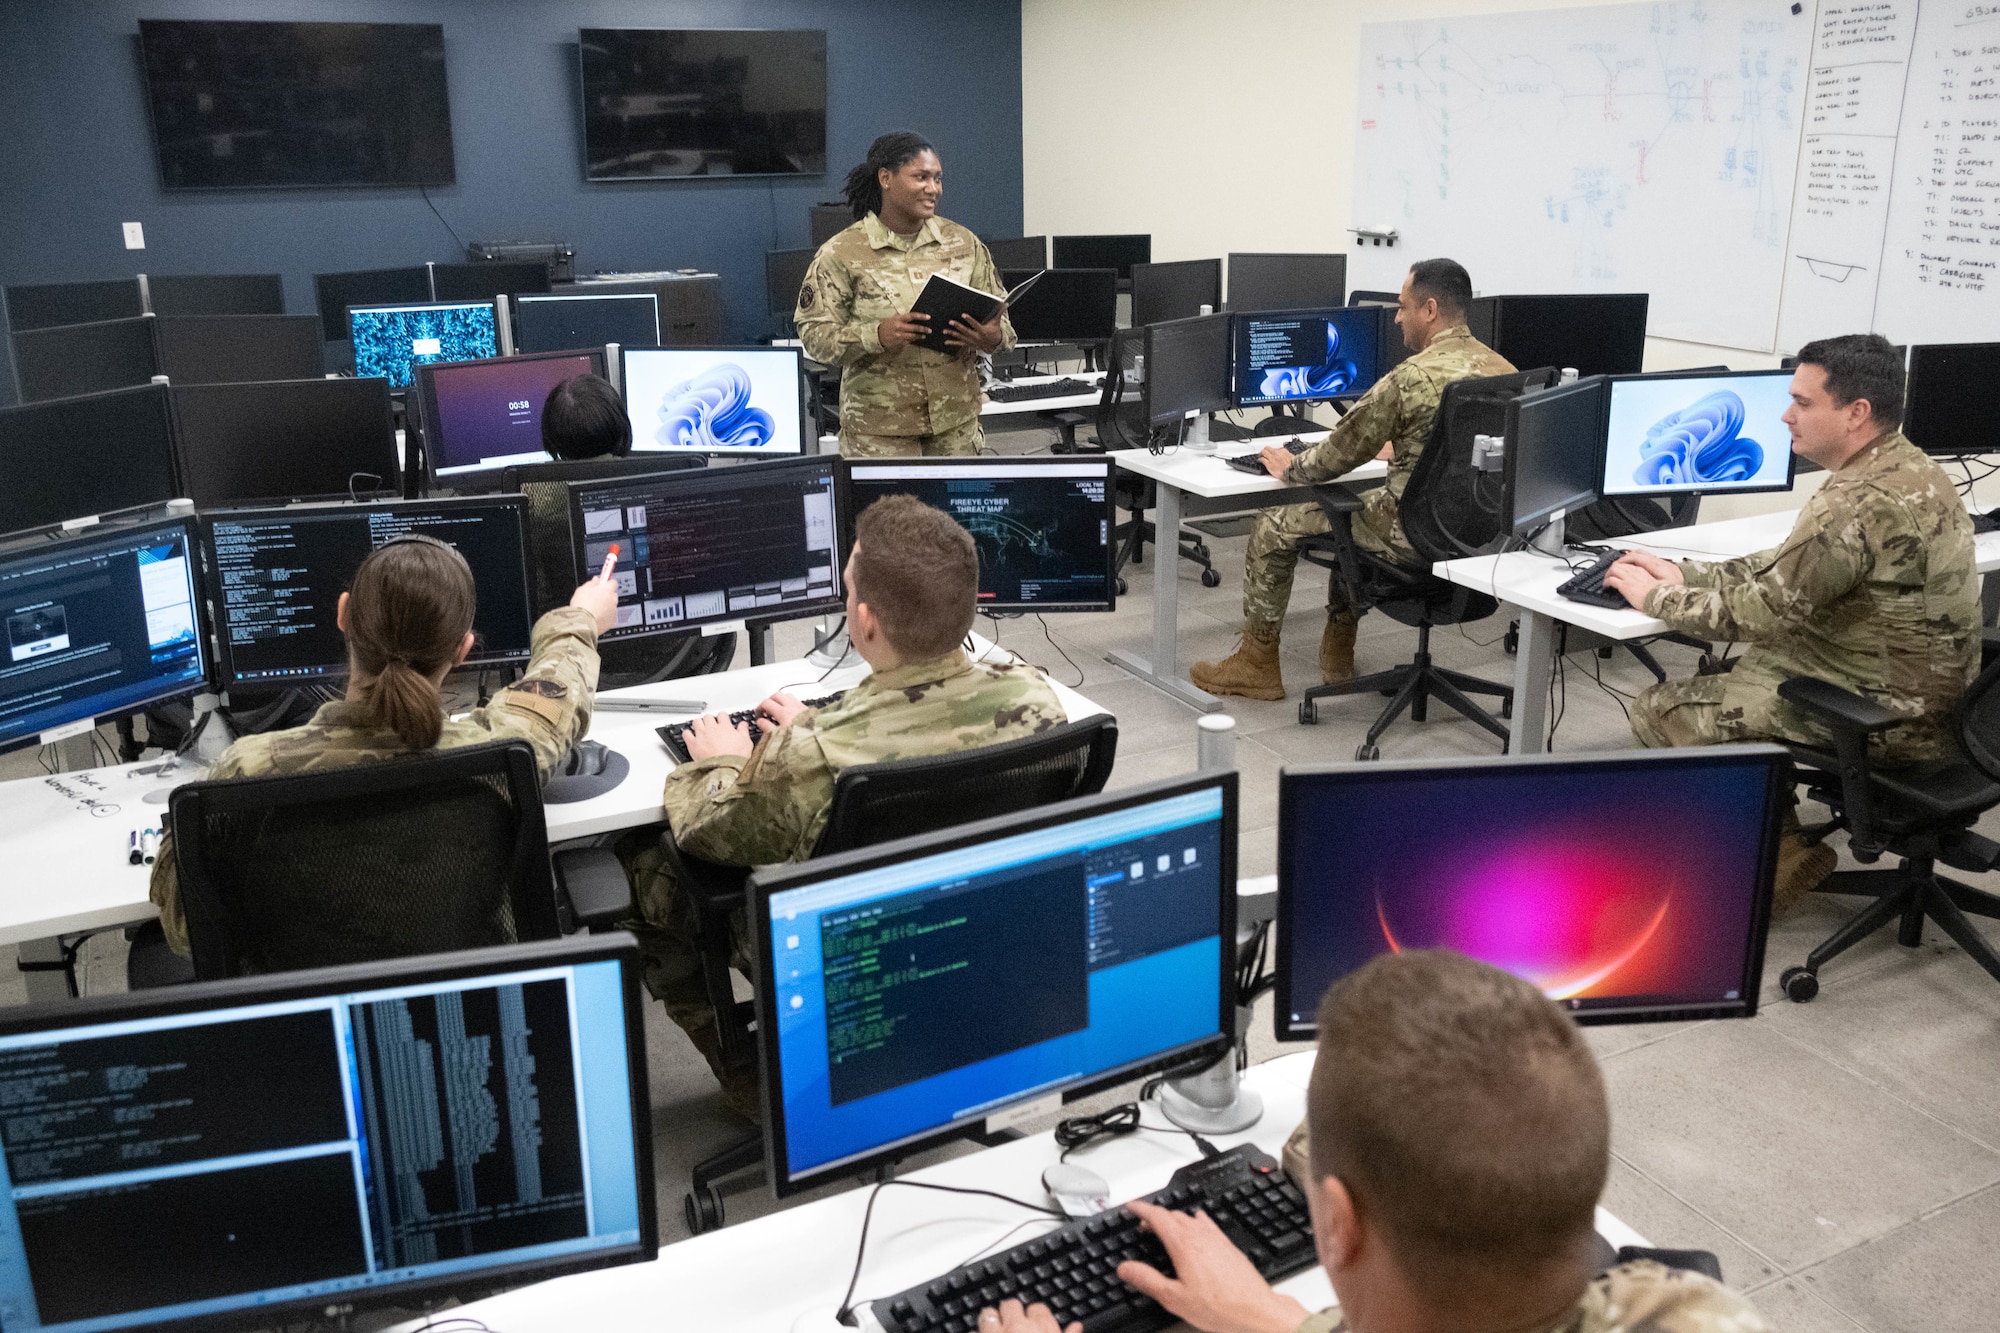 U.S. Air Force Capt. Ashley Oates, 275th Cyberspace Operations Squadron flight commander, briefs Airmen assigned to the 275th Cyberspace Operations Squadron at Warfield Air National Guard Base at Martin State Airport, Middle River, Md., on January 10, 2023.